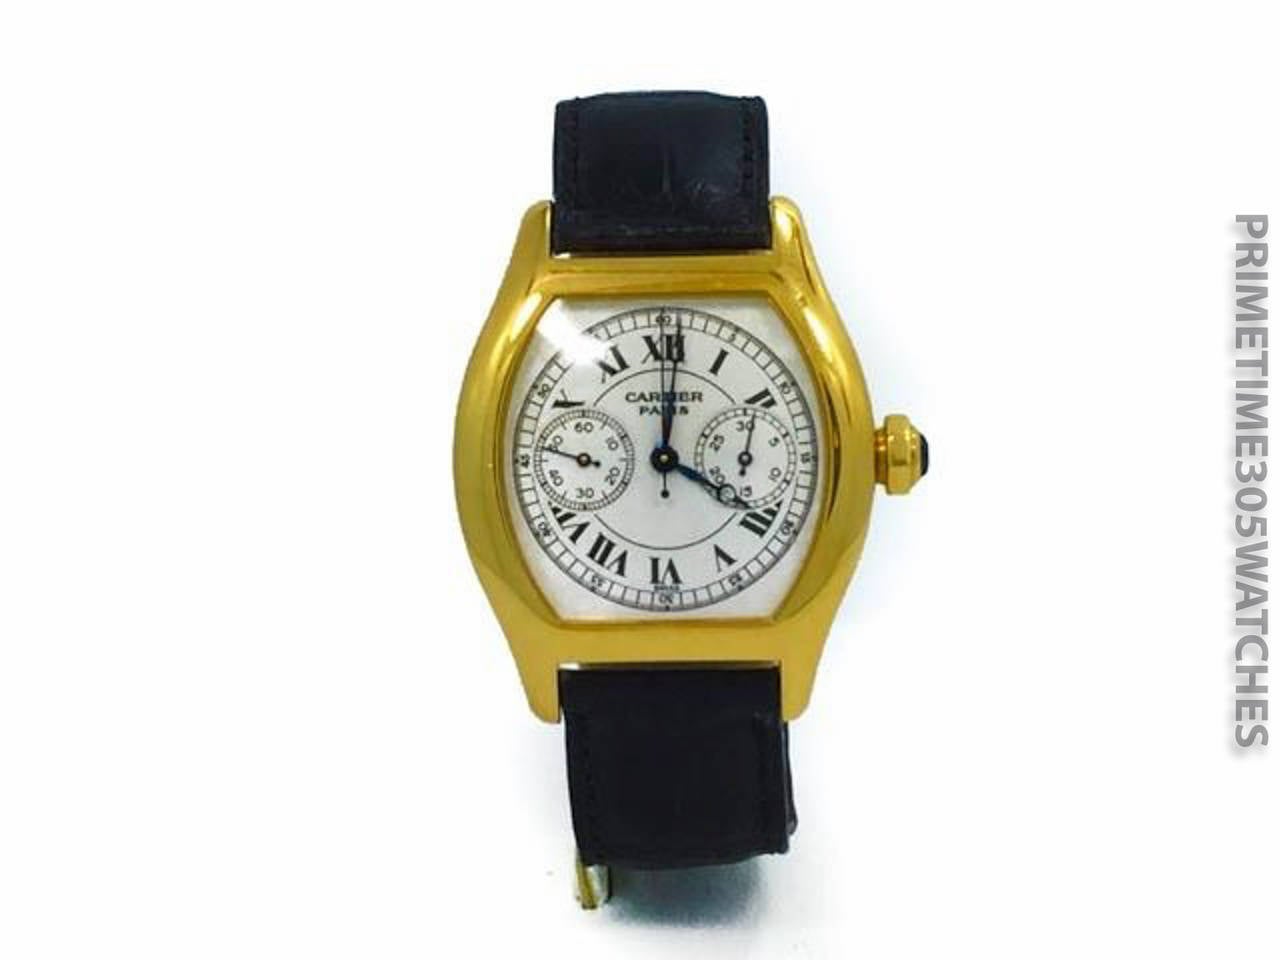 Mens Cartier Privee Tortue Monopoussoir Single Button Chronograph Watch in 18k Yellow Gold On Leather Strap & 18k Cartier Deployment Buckle. The Watch is In Excellent Condition and Works Great. Included with The Watch is a Cartier Box.